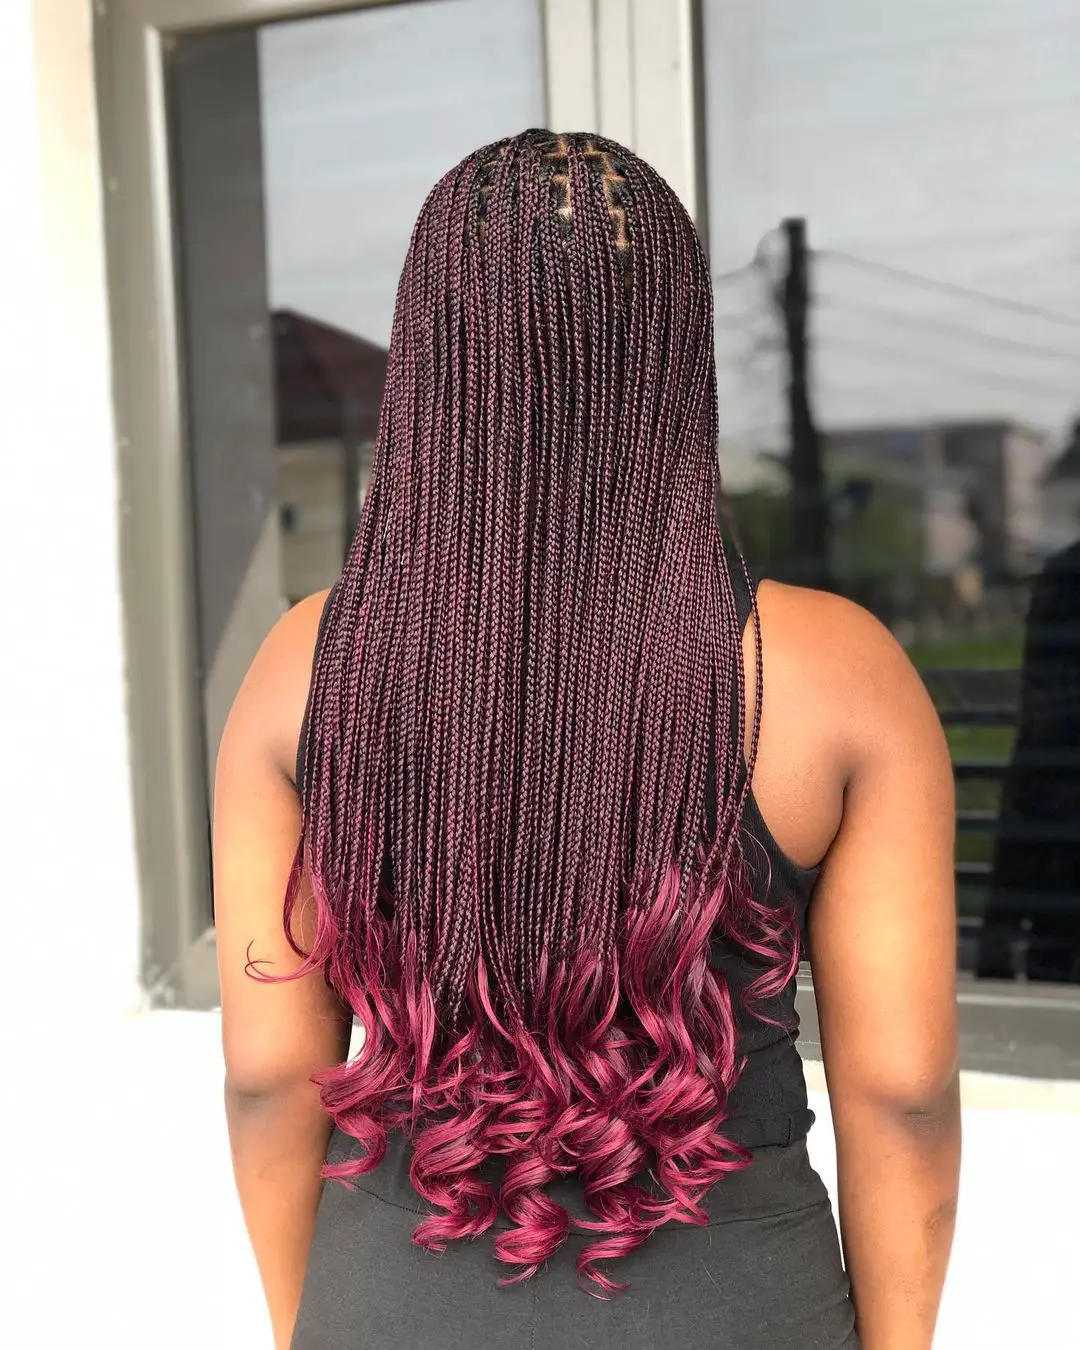 50-best-braided-hairstyles-for-black-women Burgundy Box Braids with Curly Ends